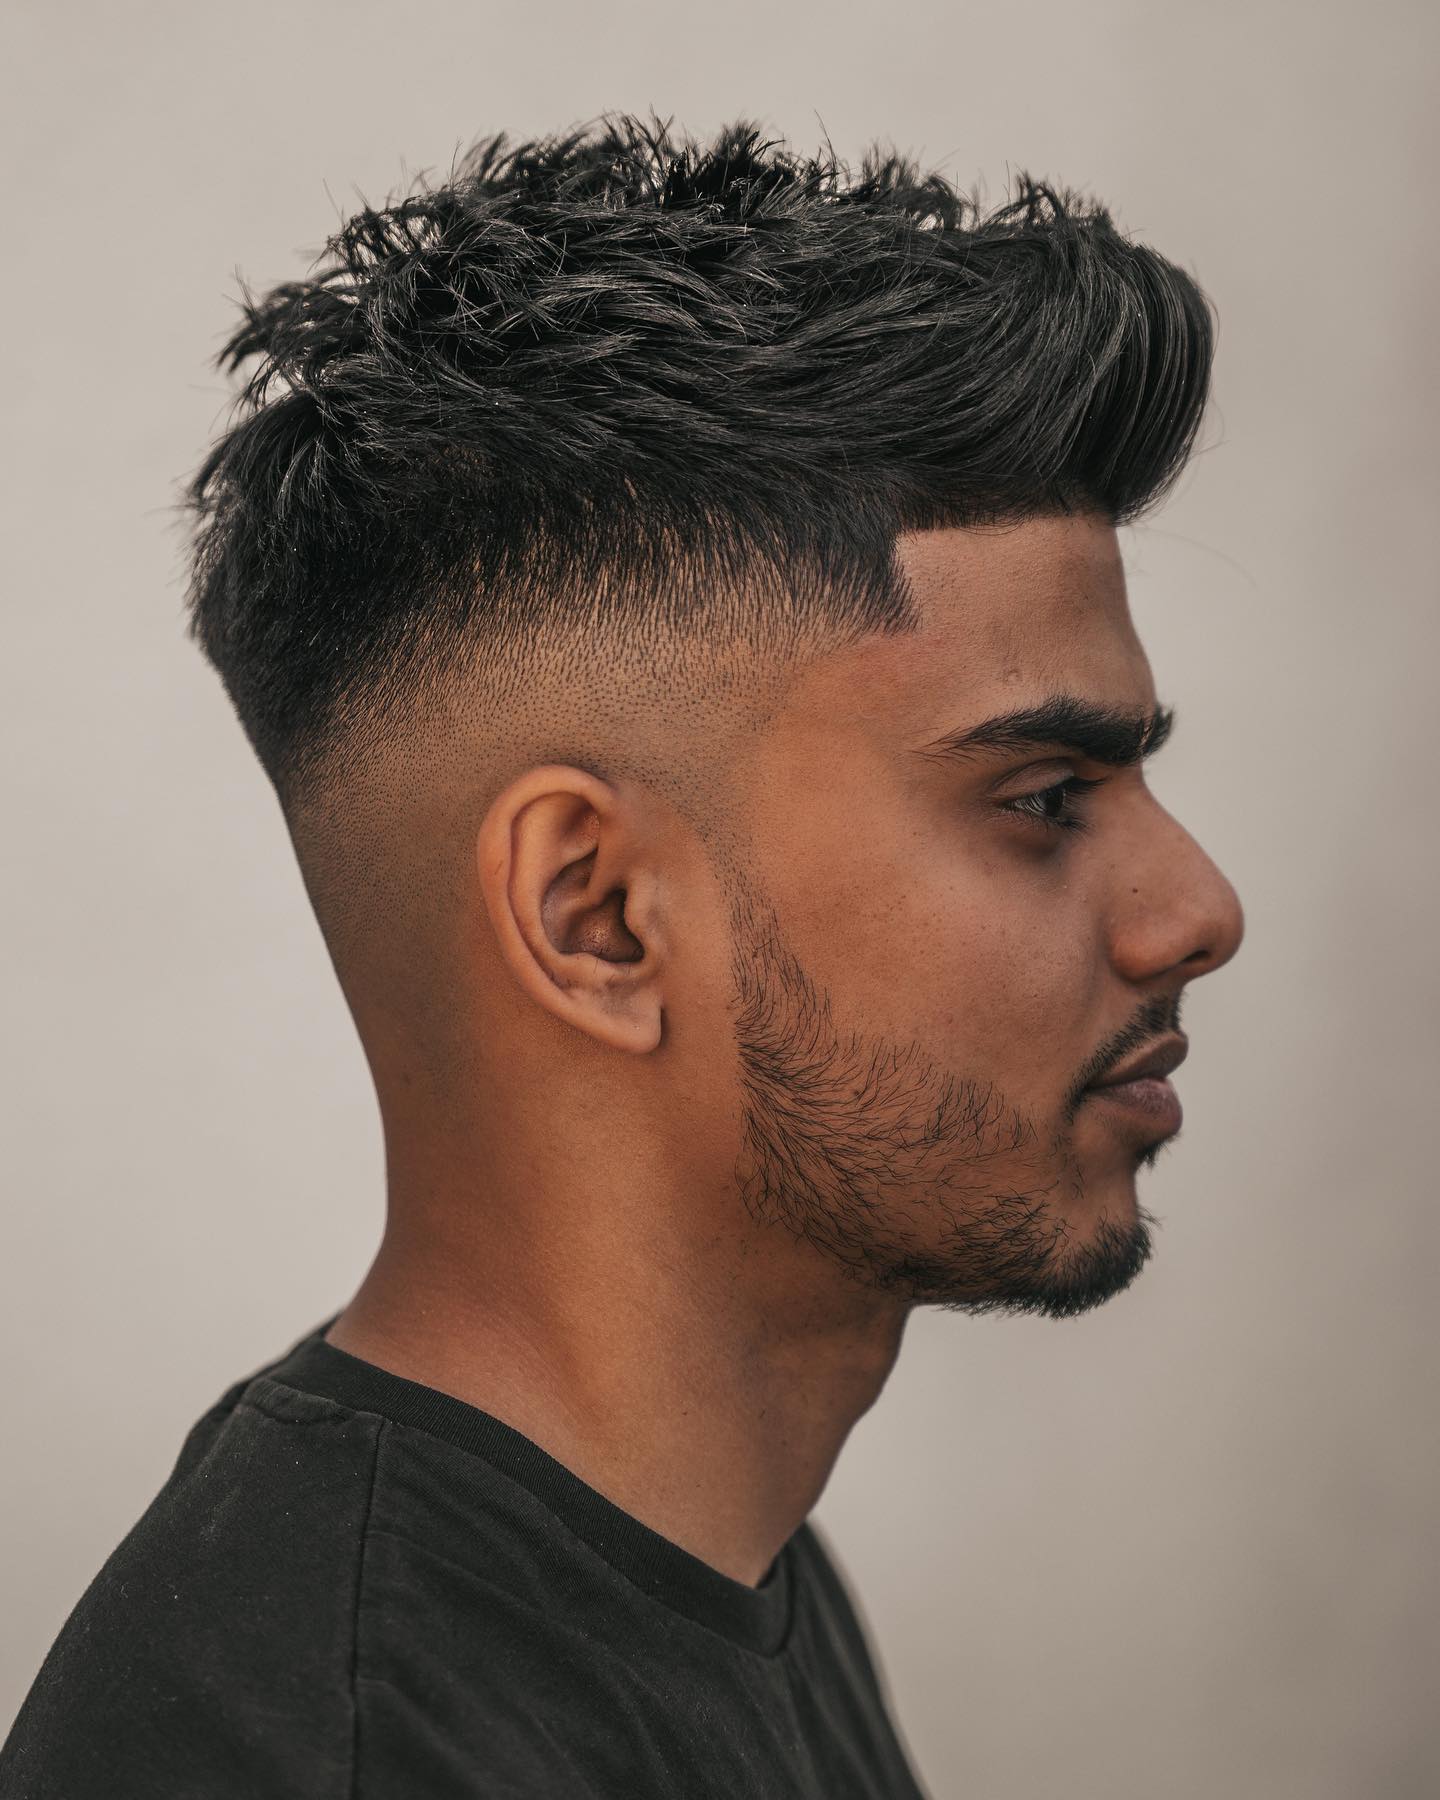 Top 10 Classic Men’s Haircut Ideas that Look Trendy at Any Age